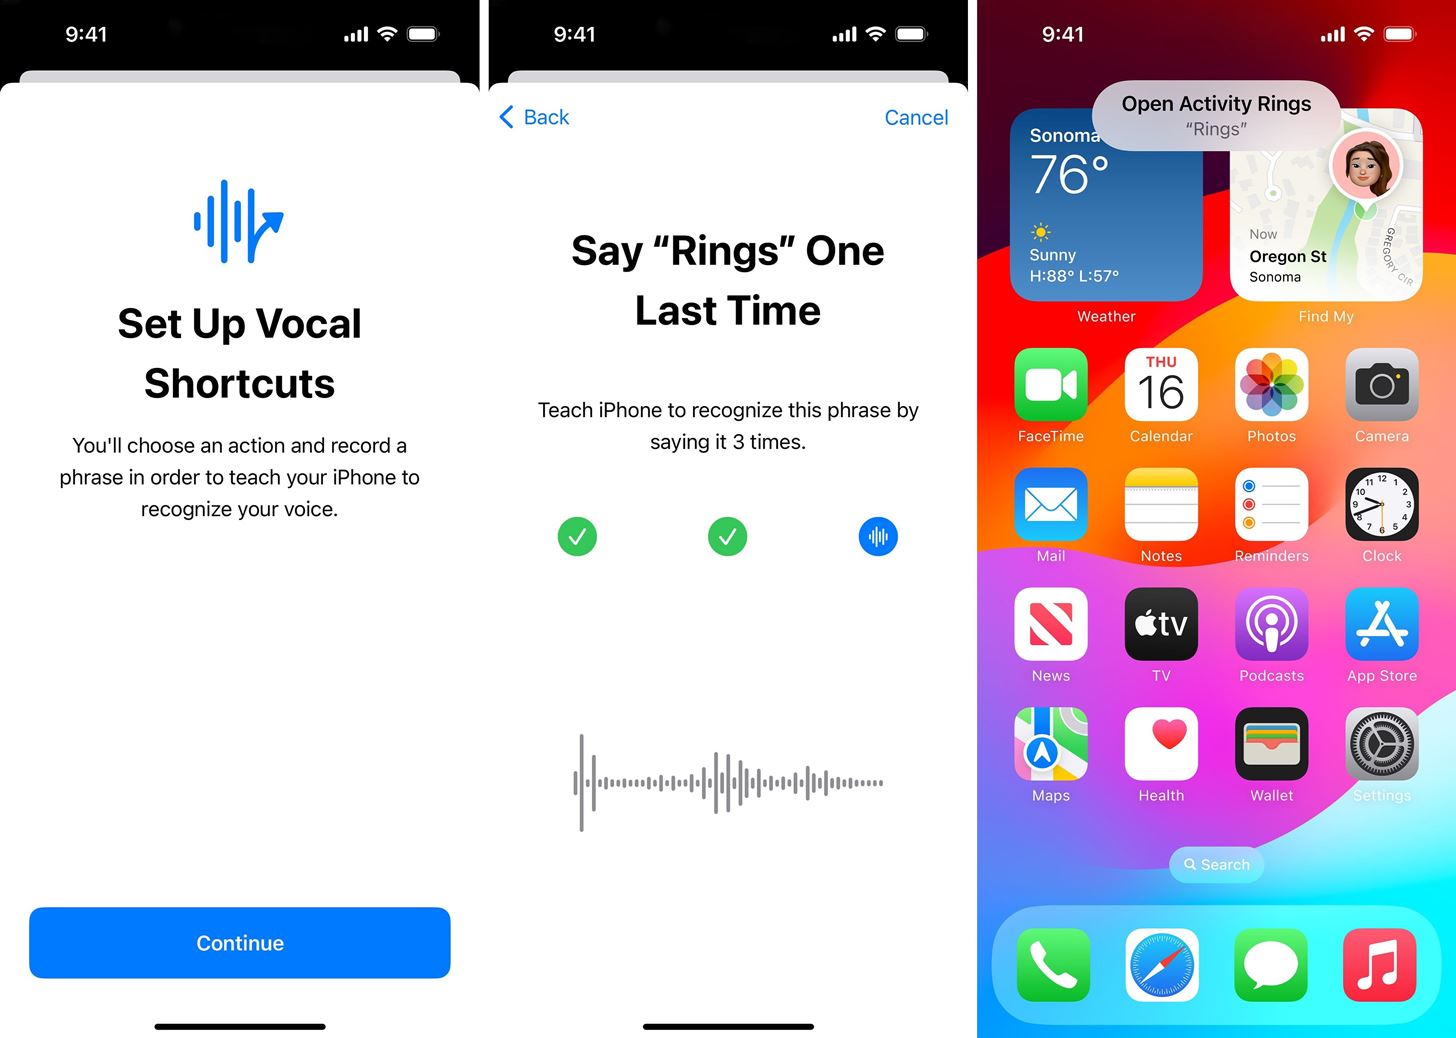 17 New Accessibility Features Coming to iPhone and iPad with iOS 18 and iPadOS 18